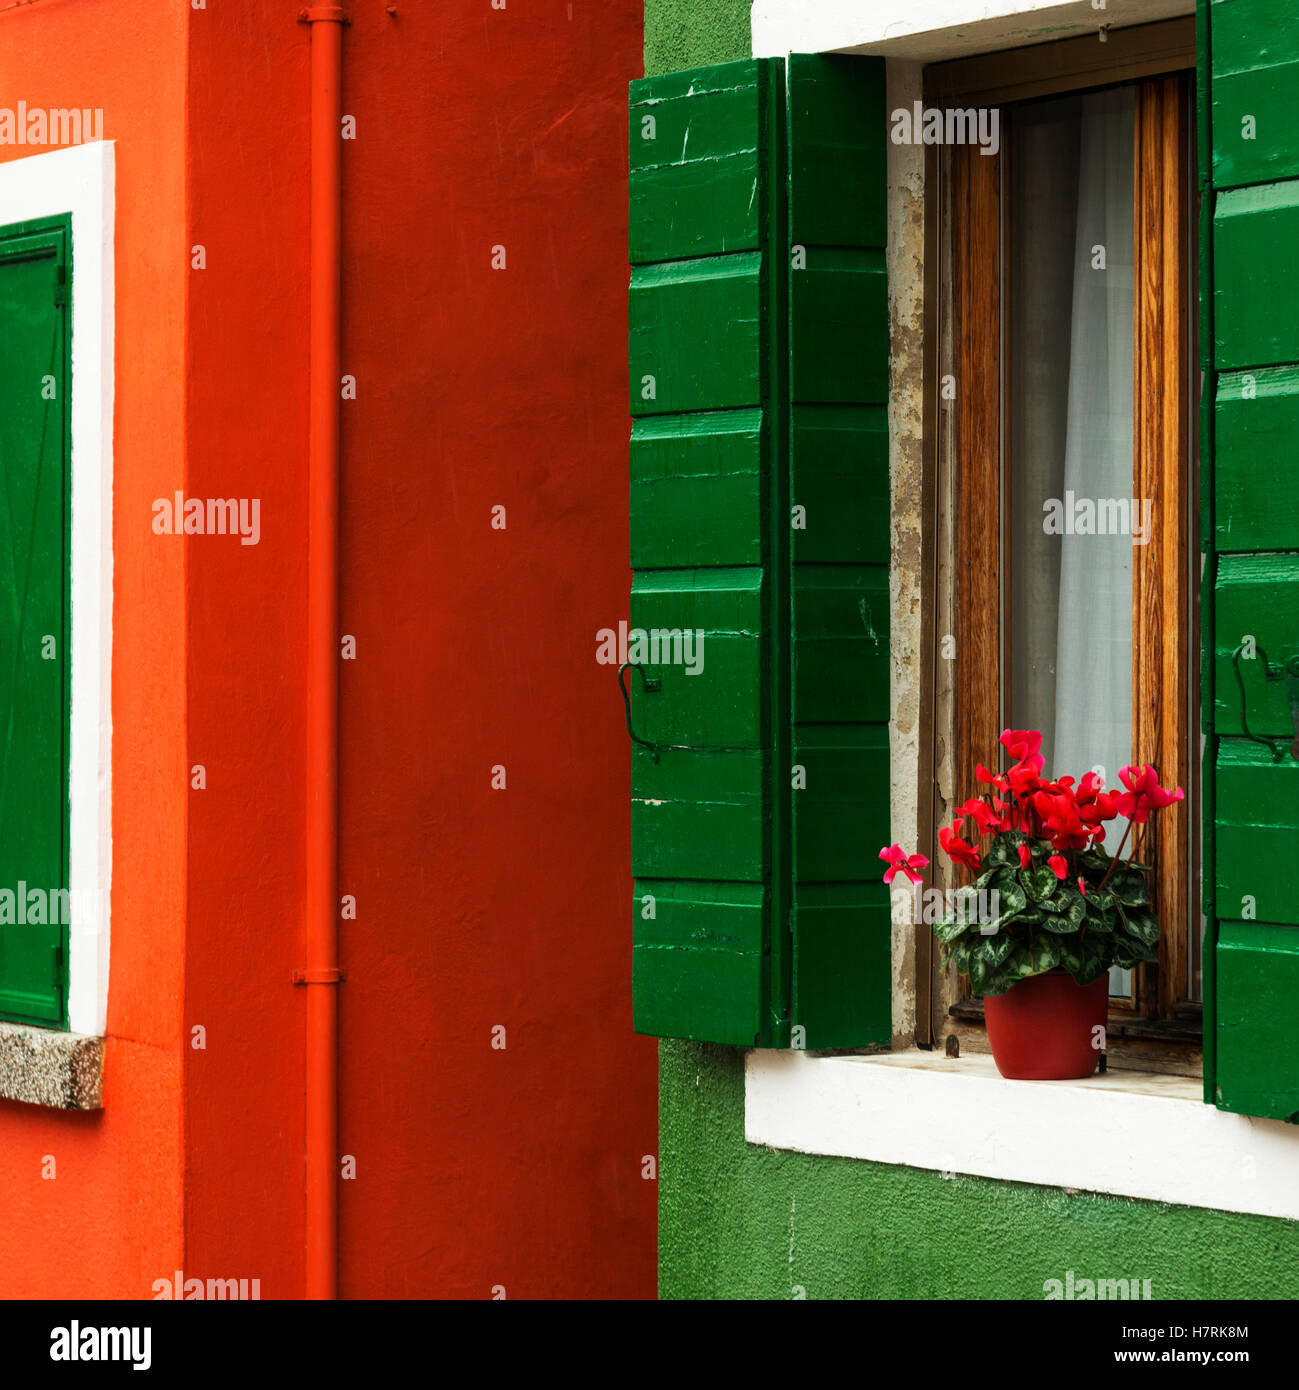 Walls of a house painted red and green with a potted flower on the windowsill; Venice, Italy Stock Photo